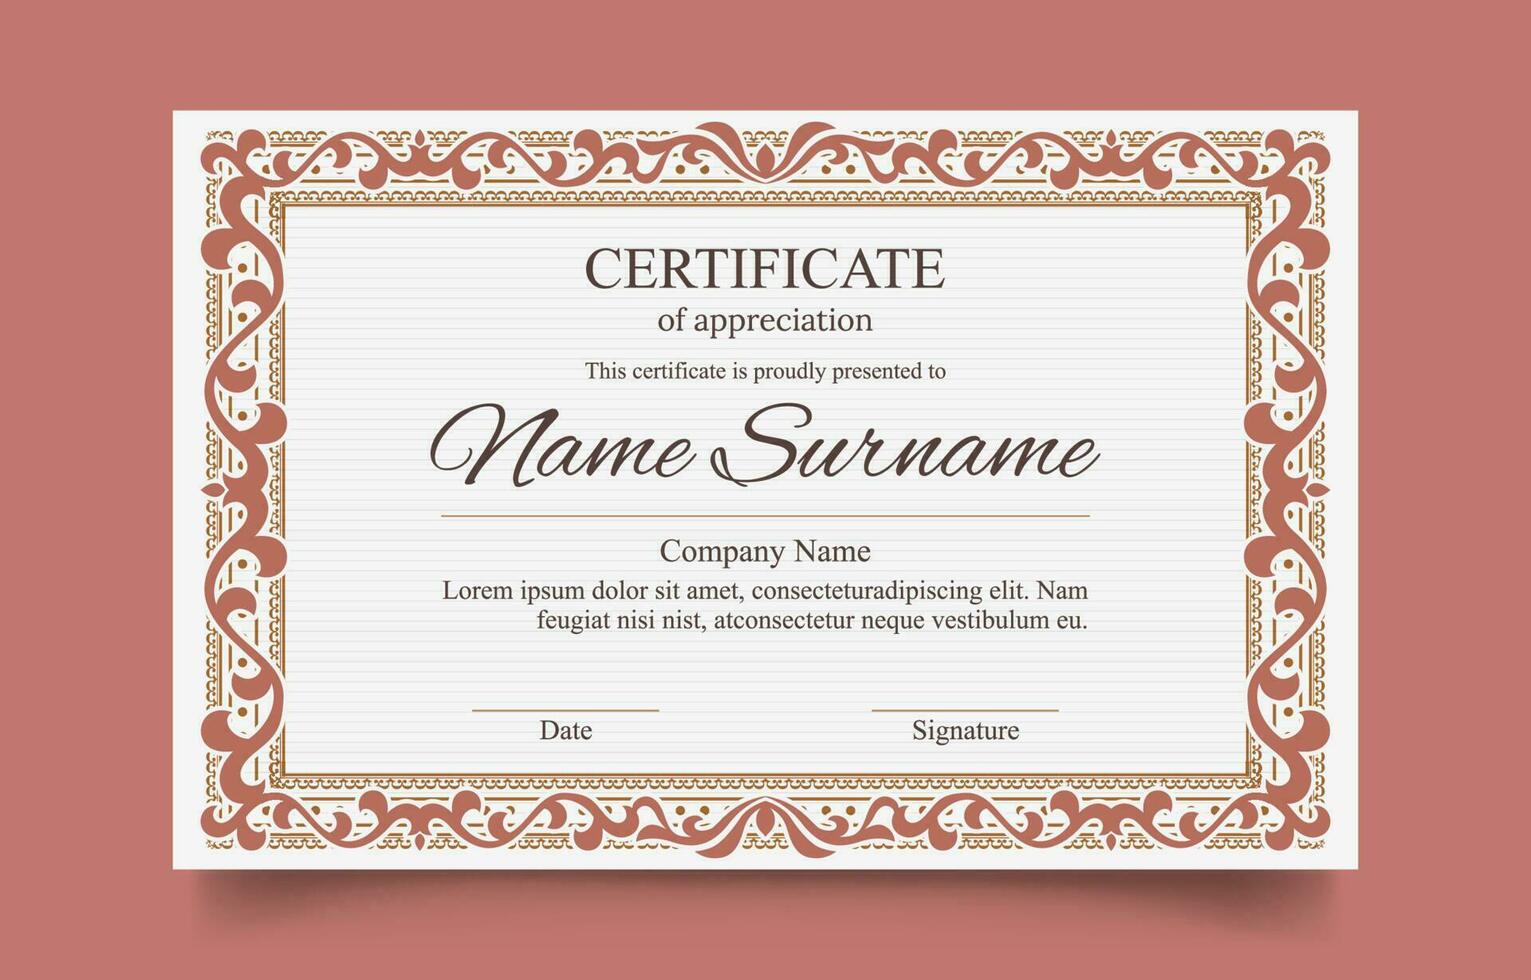 Classic Certificate Template With Floral Frame vector